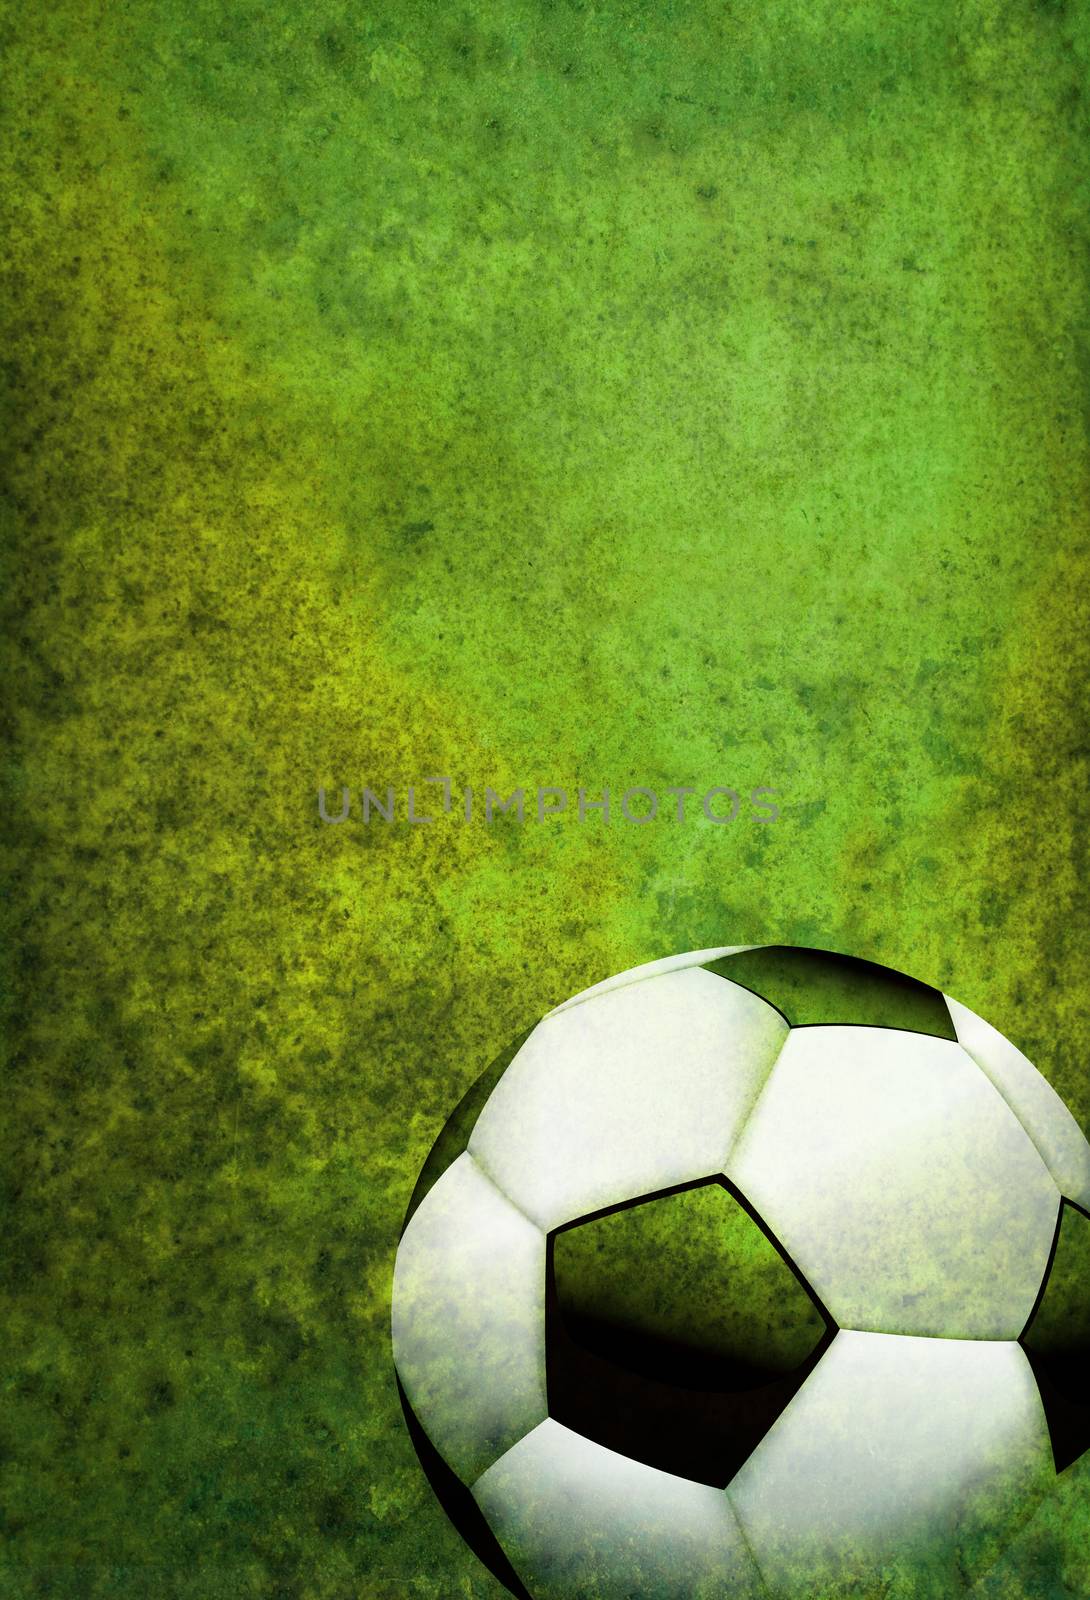 A green textured soccer football field background with ball. Room for copy.